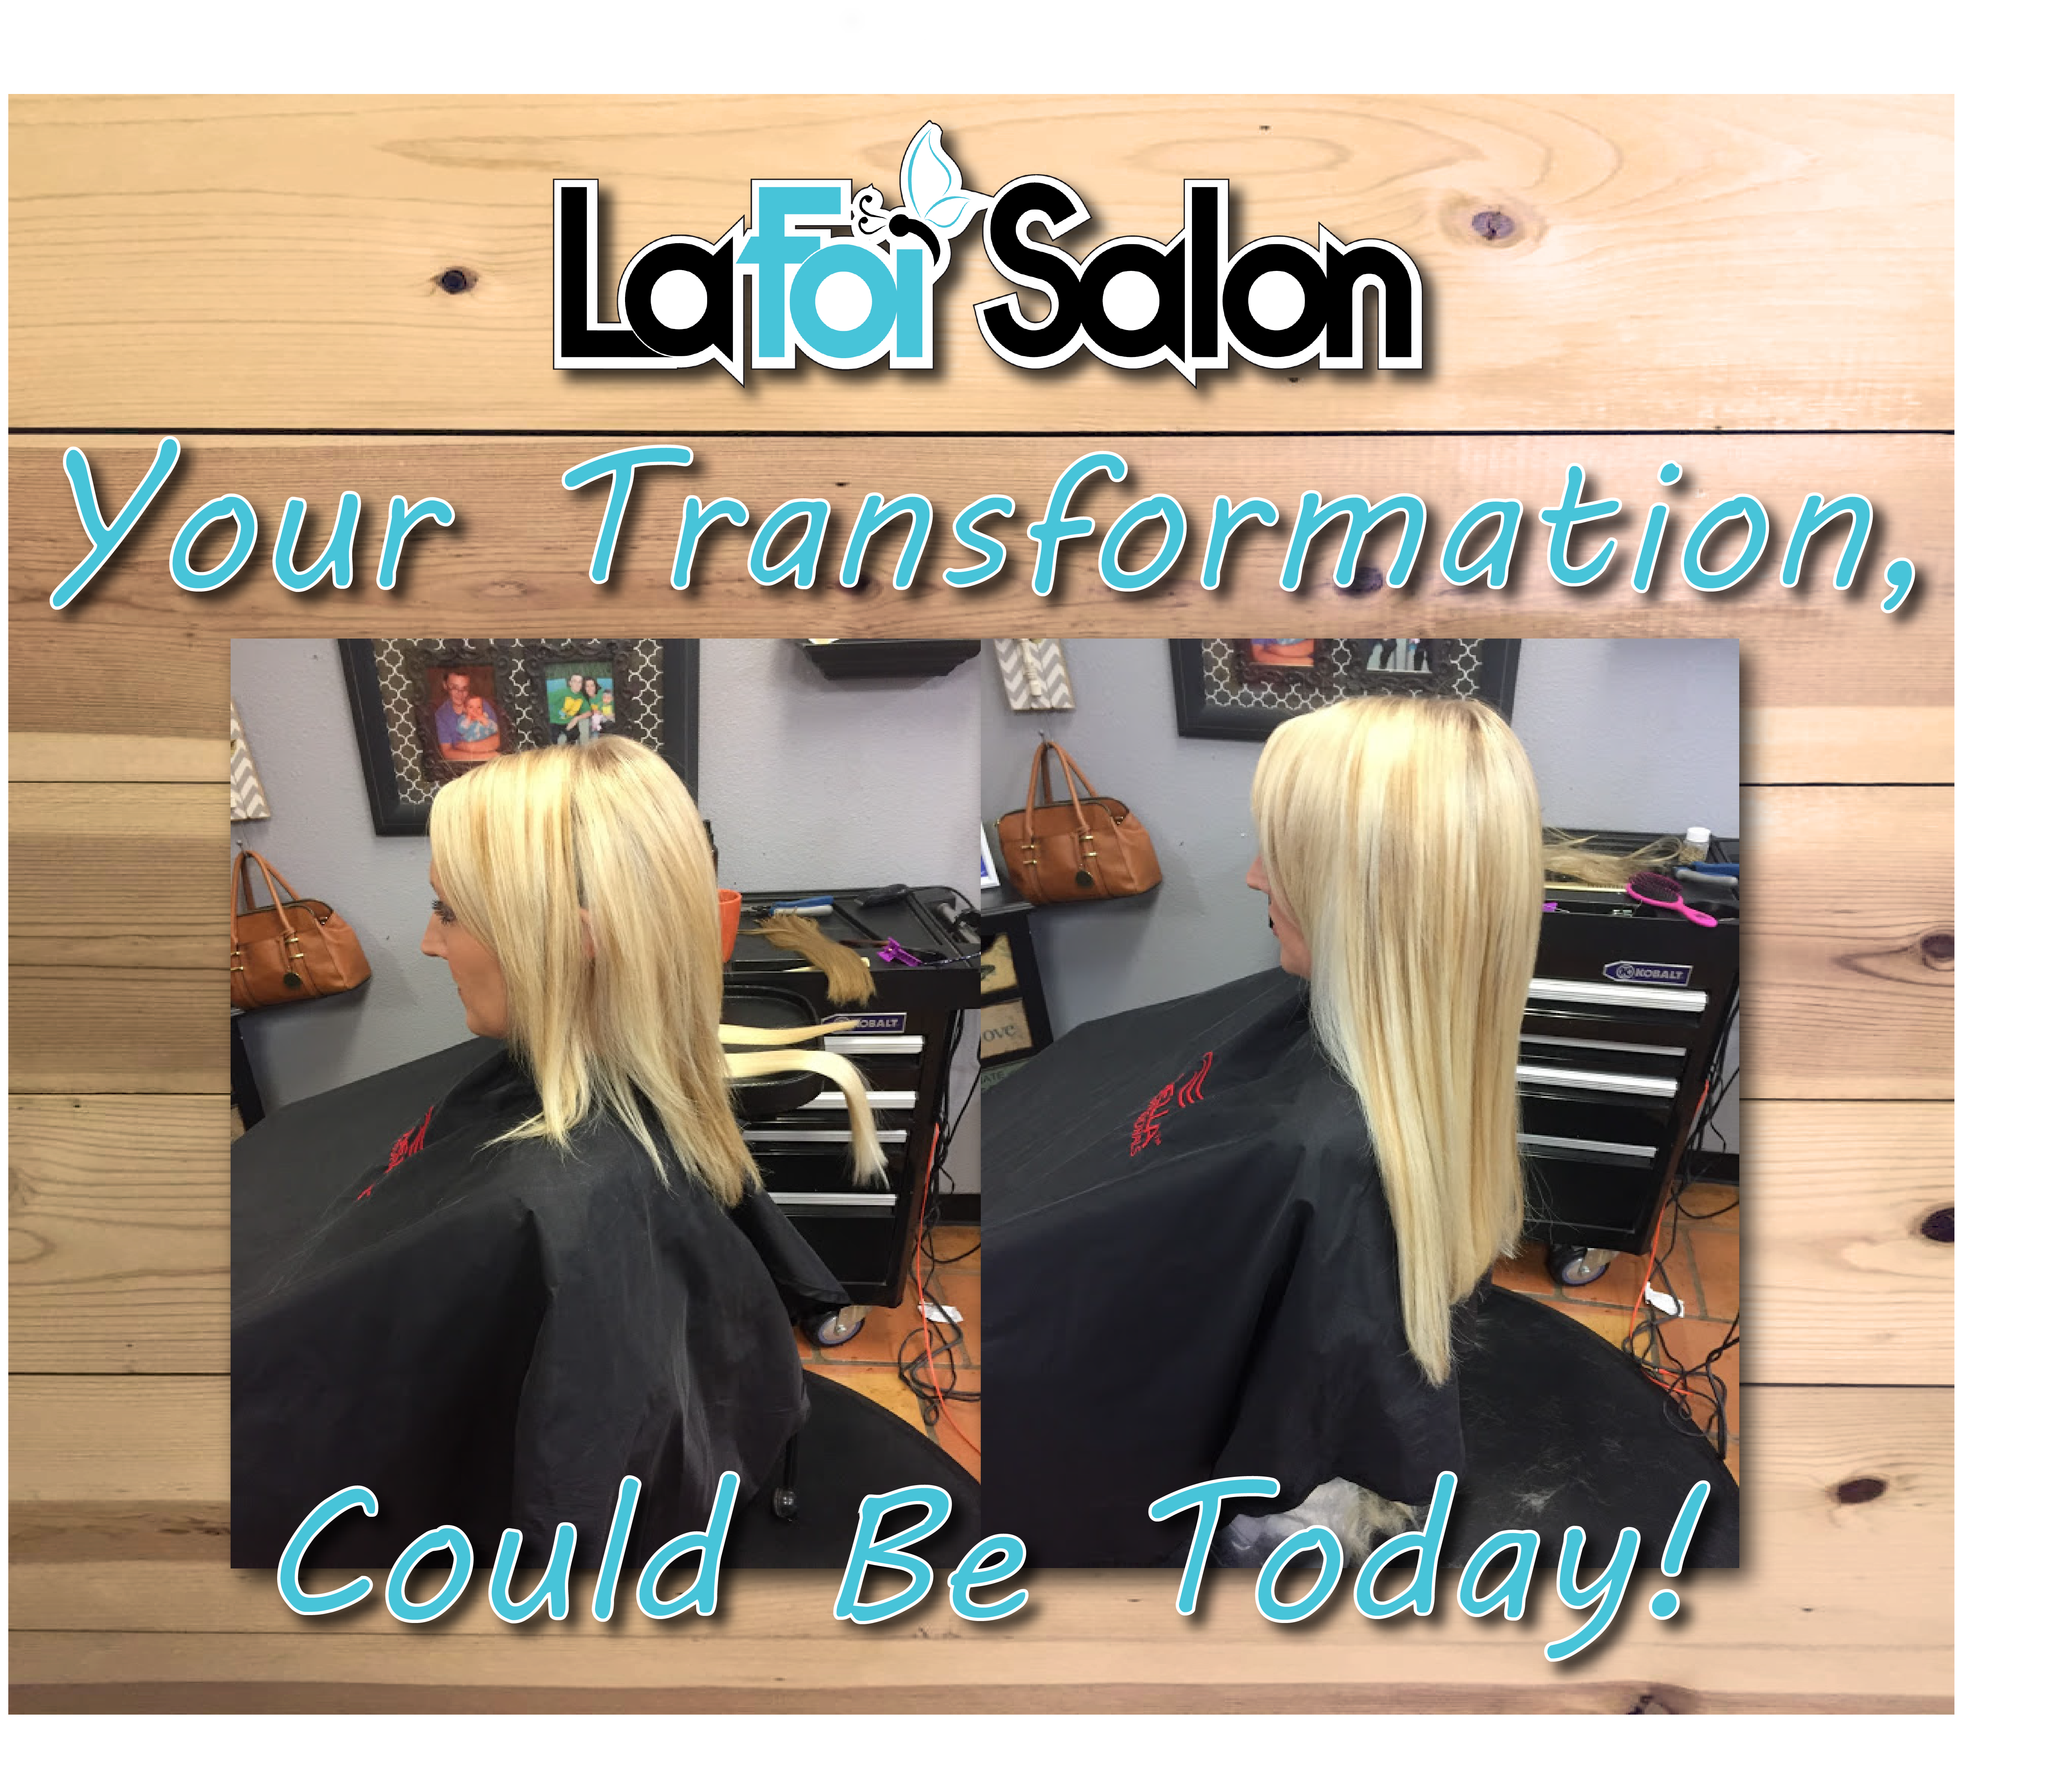 Call Today To Book Your Next Transformation! (806) 771-4545 www.lafoisalon.com Hair Extensions By: LeeAnn Floyd